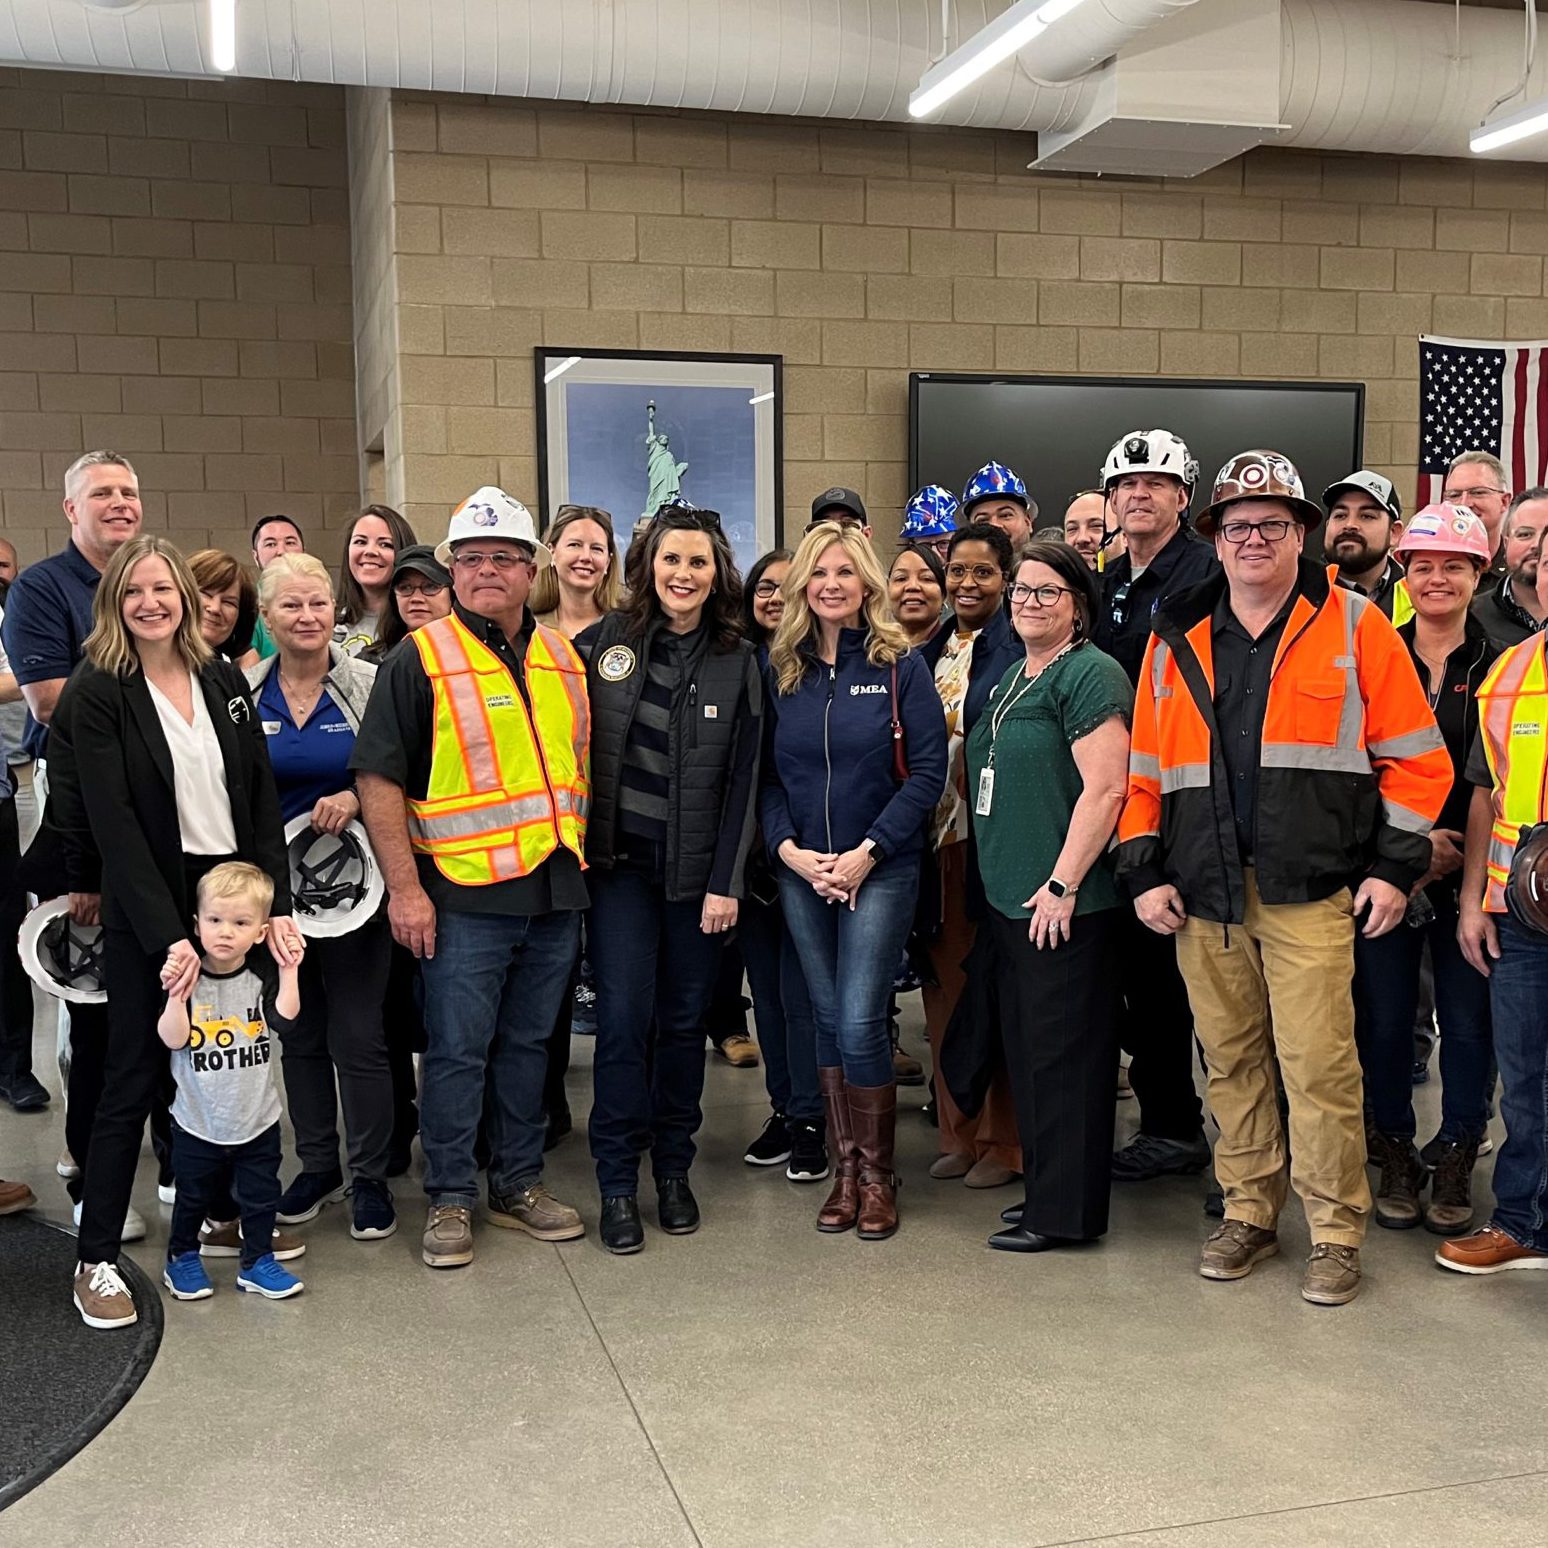 A group photo featuring Governor Whitmer and MEA President Madafferi